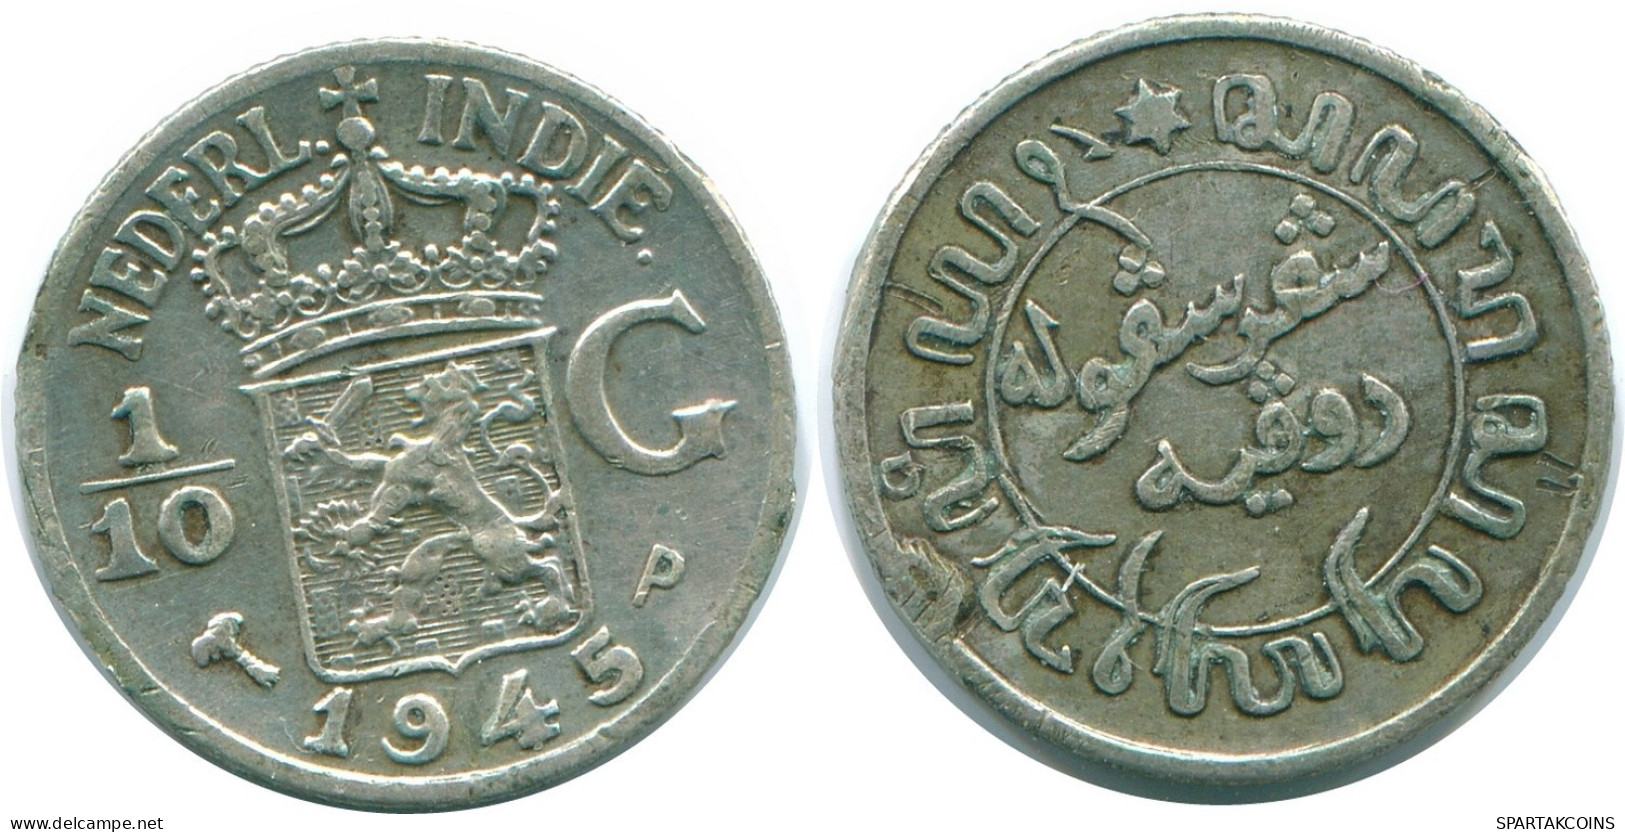 1/10 GULDEN 1945 P NETHERLANDS EAST INDIES SILVER Colonial Coin #NL14115.3.U.A - Indie Olandesi